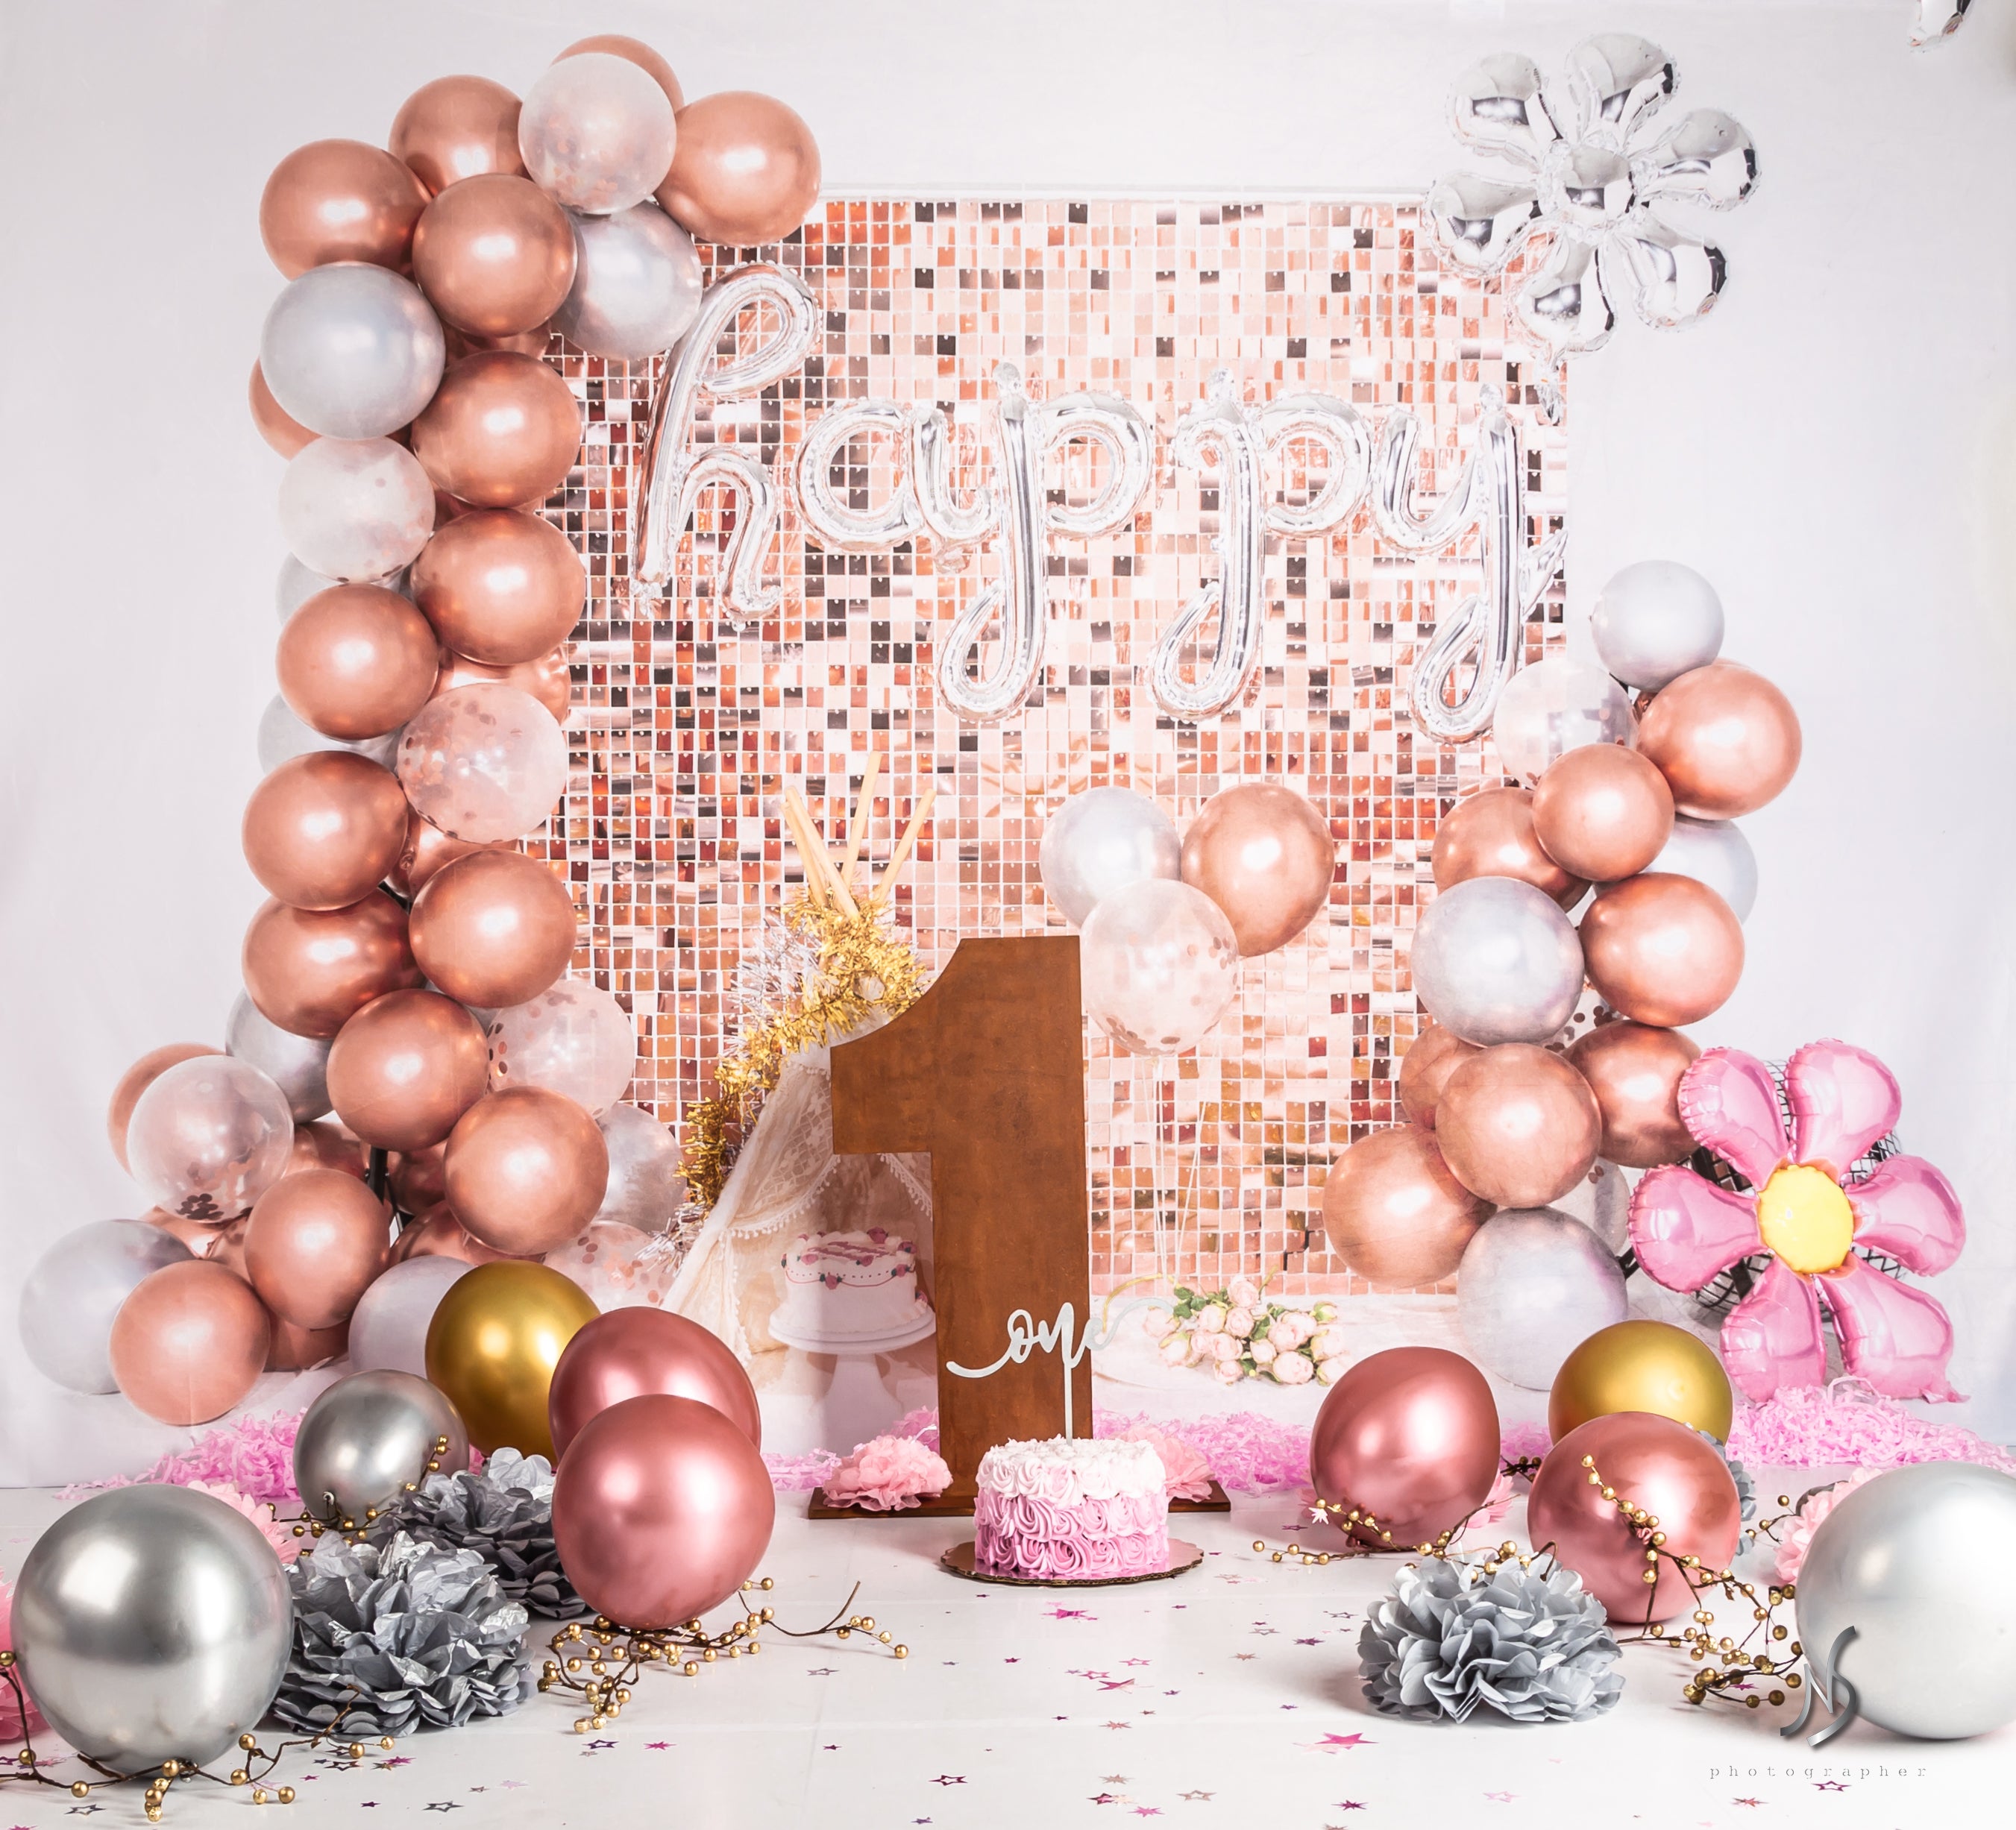 Kate Birthday Backdrop Balloons Chocolate Printed Shiny Sequin Wall Party Designed by Emetselch